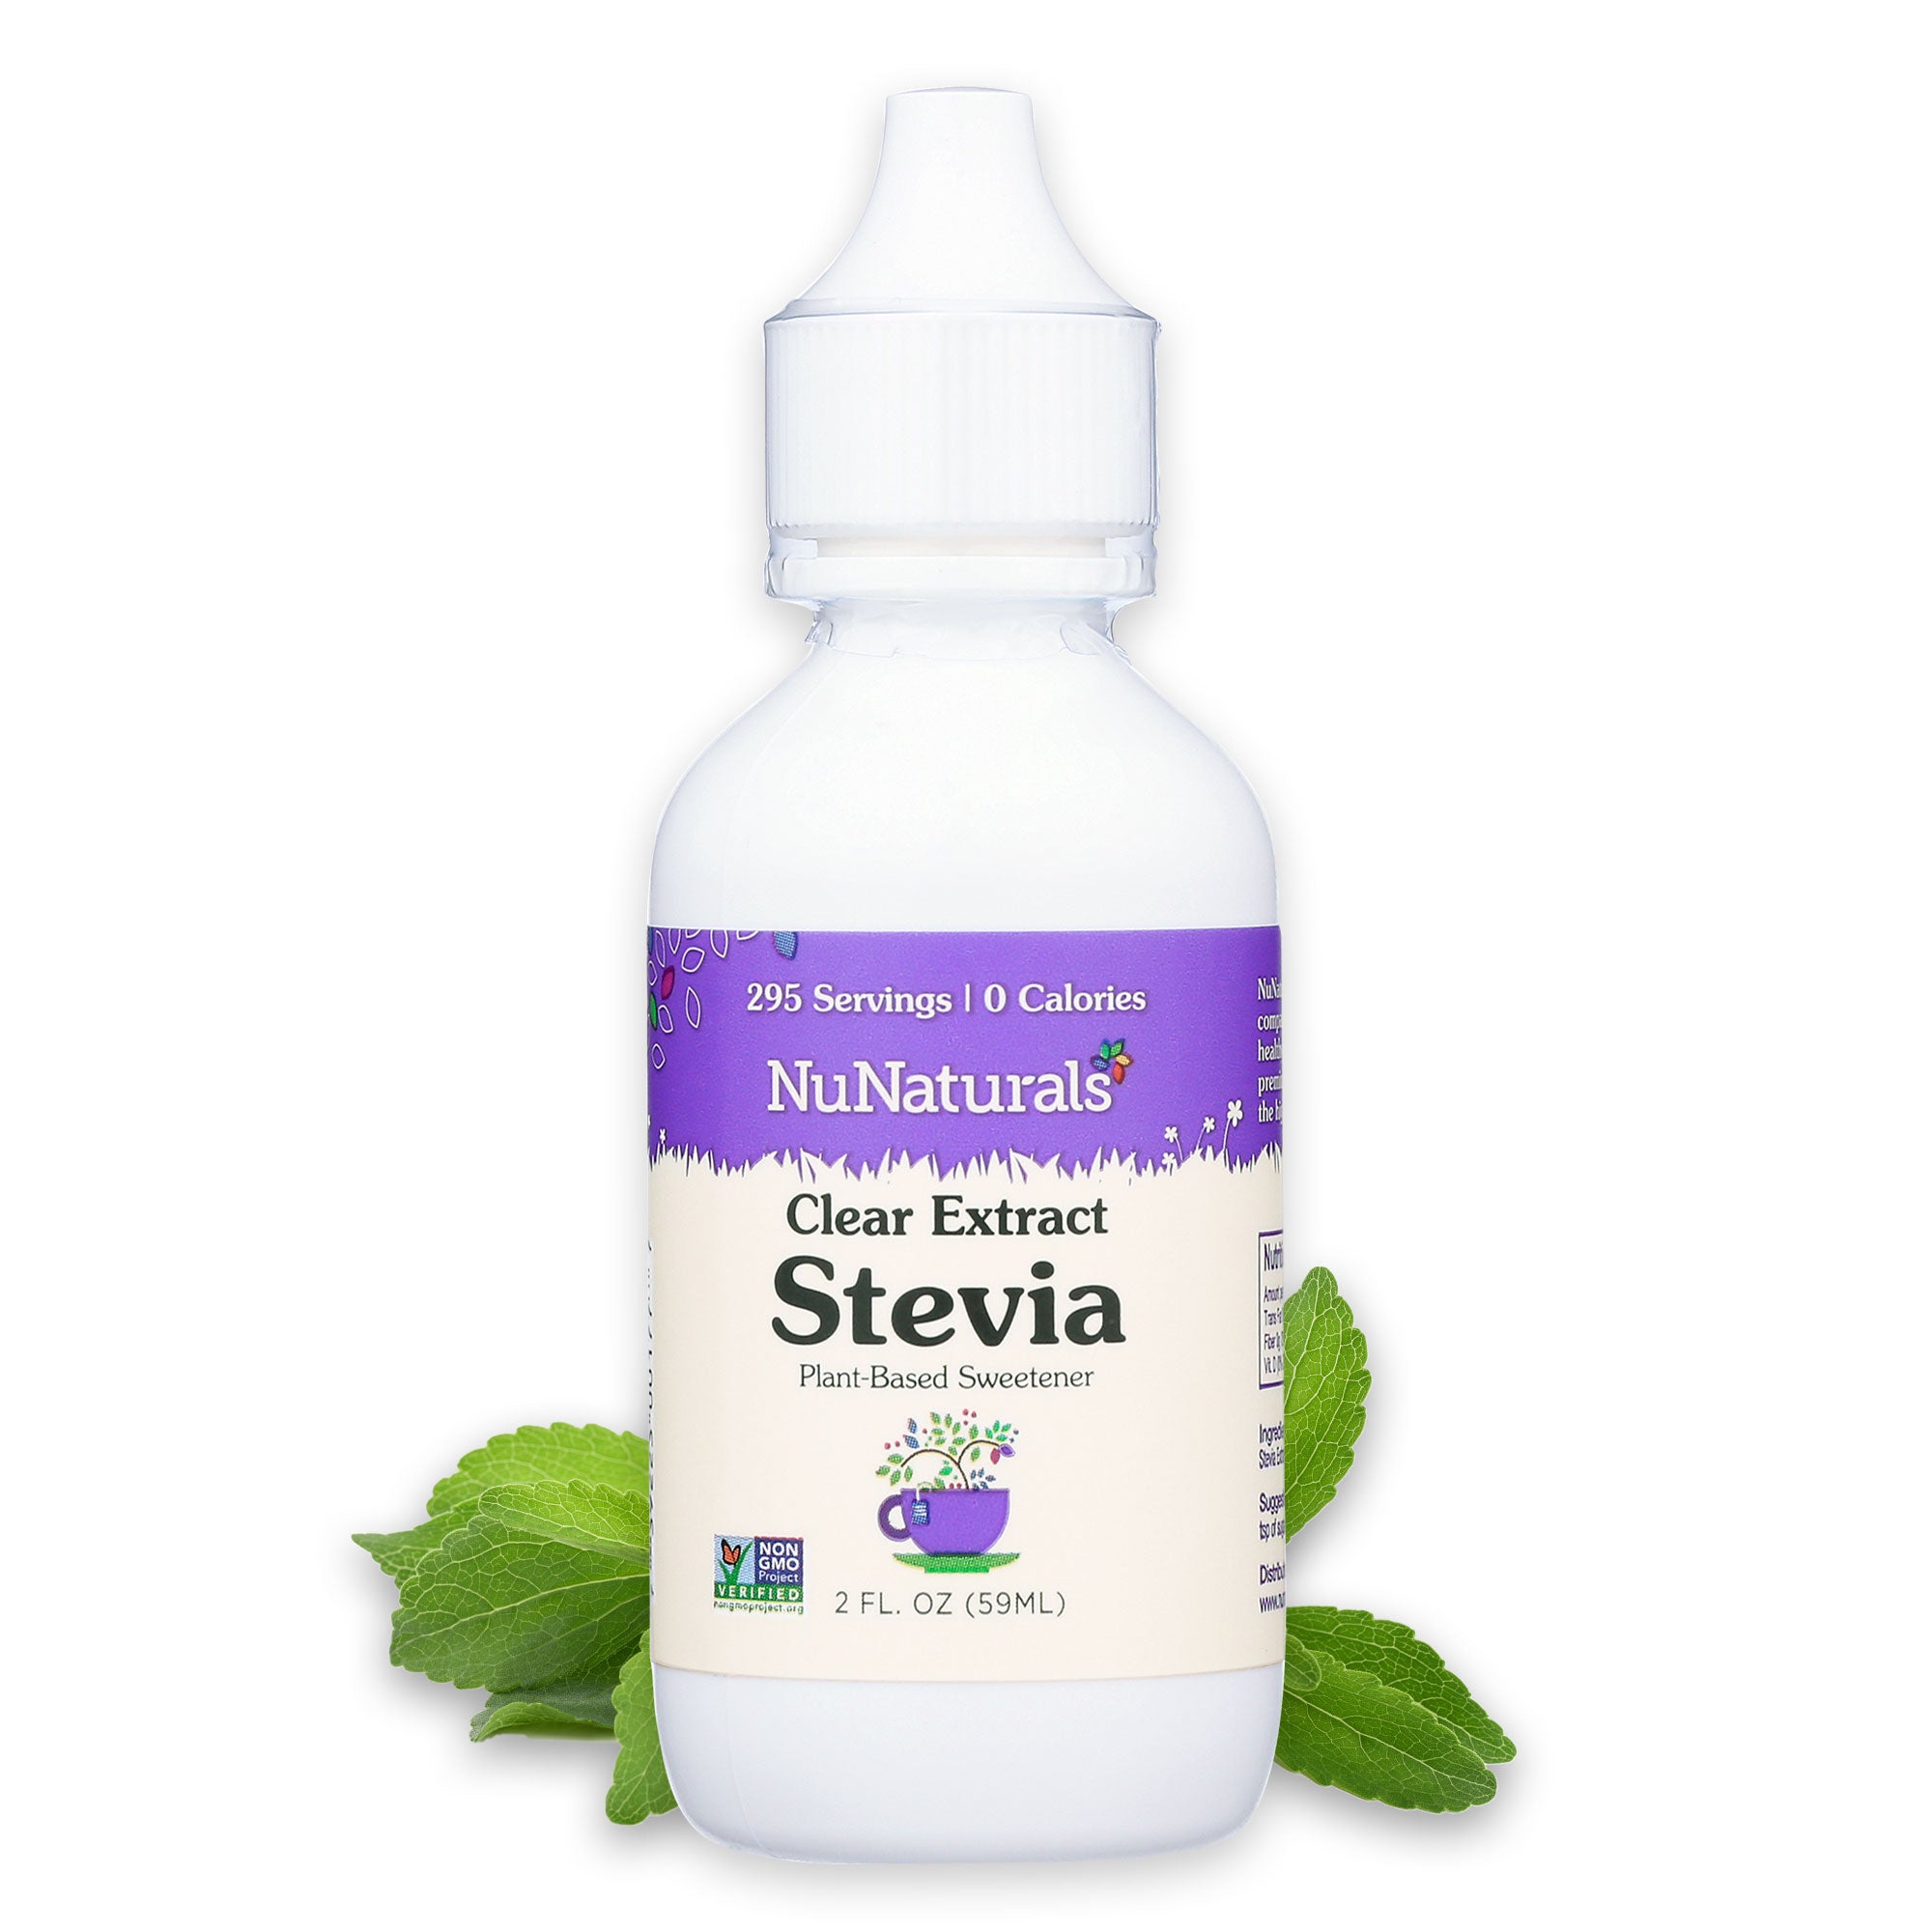 NuNaturals Clear Extract Stevia Plastic Bottle